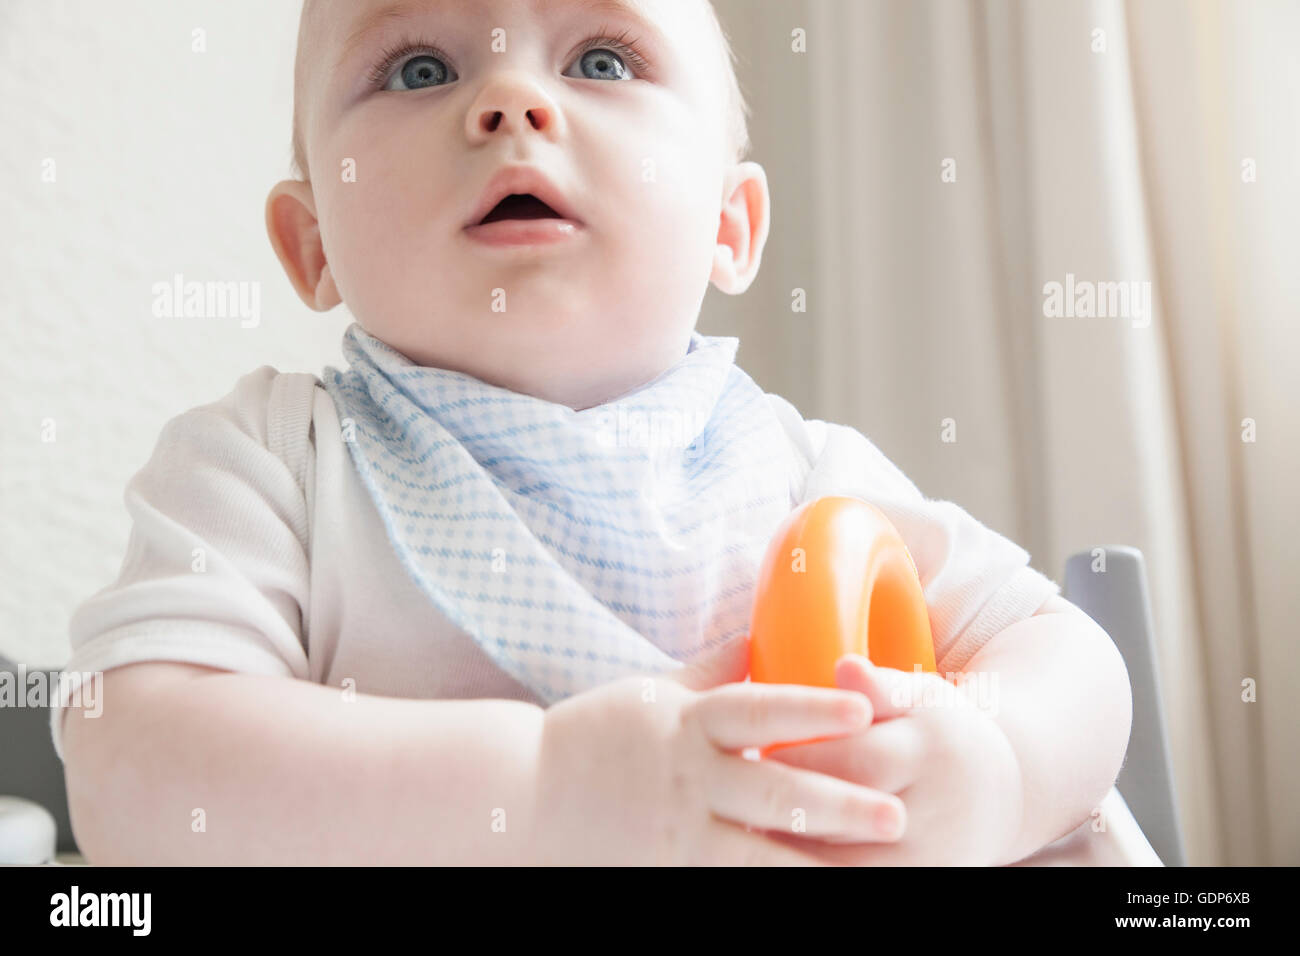 Baby boy in high chair with teething ring Stock Photo